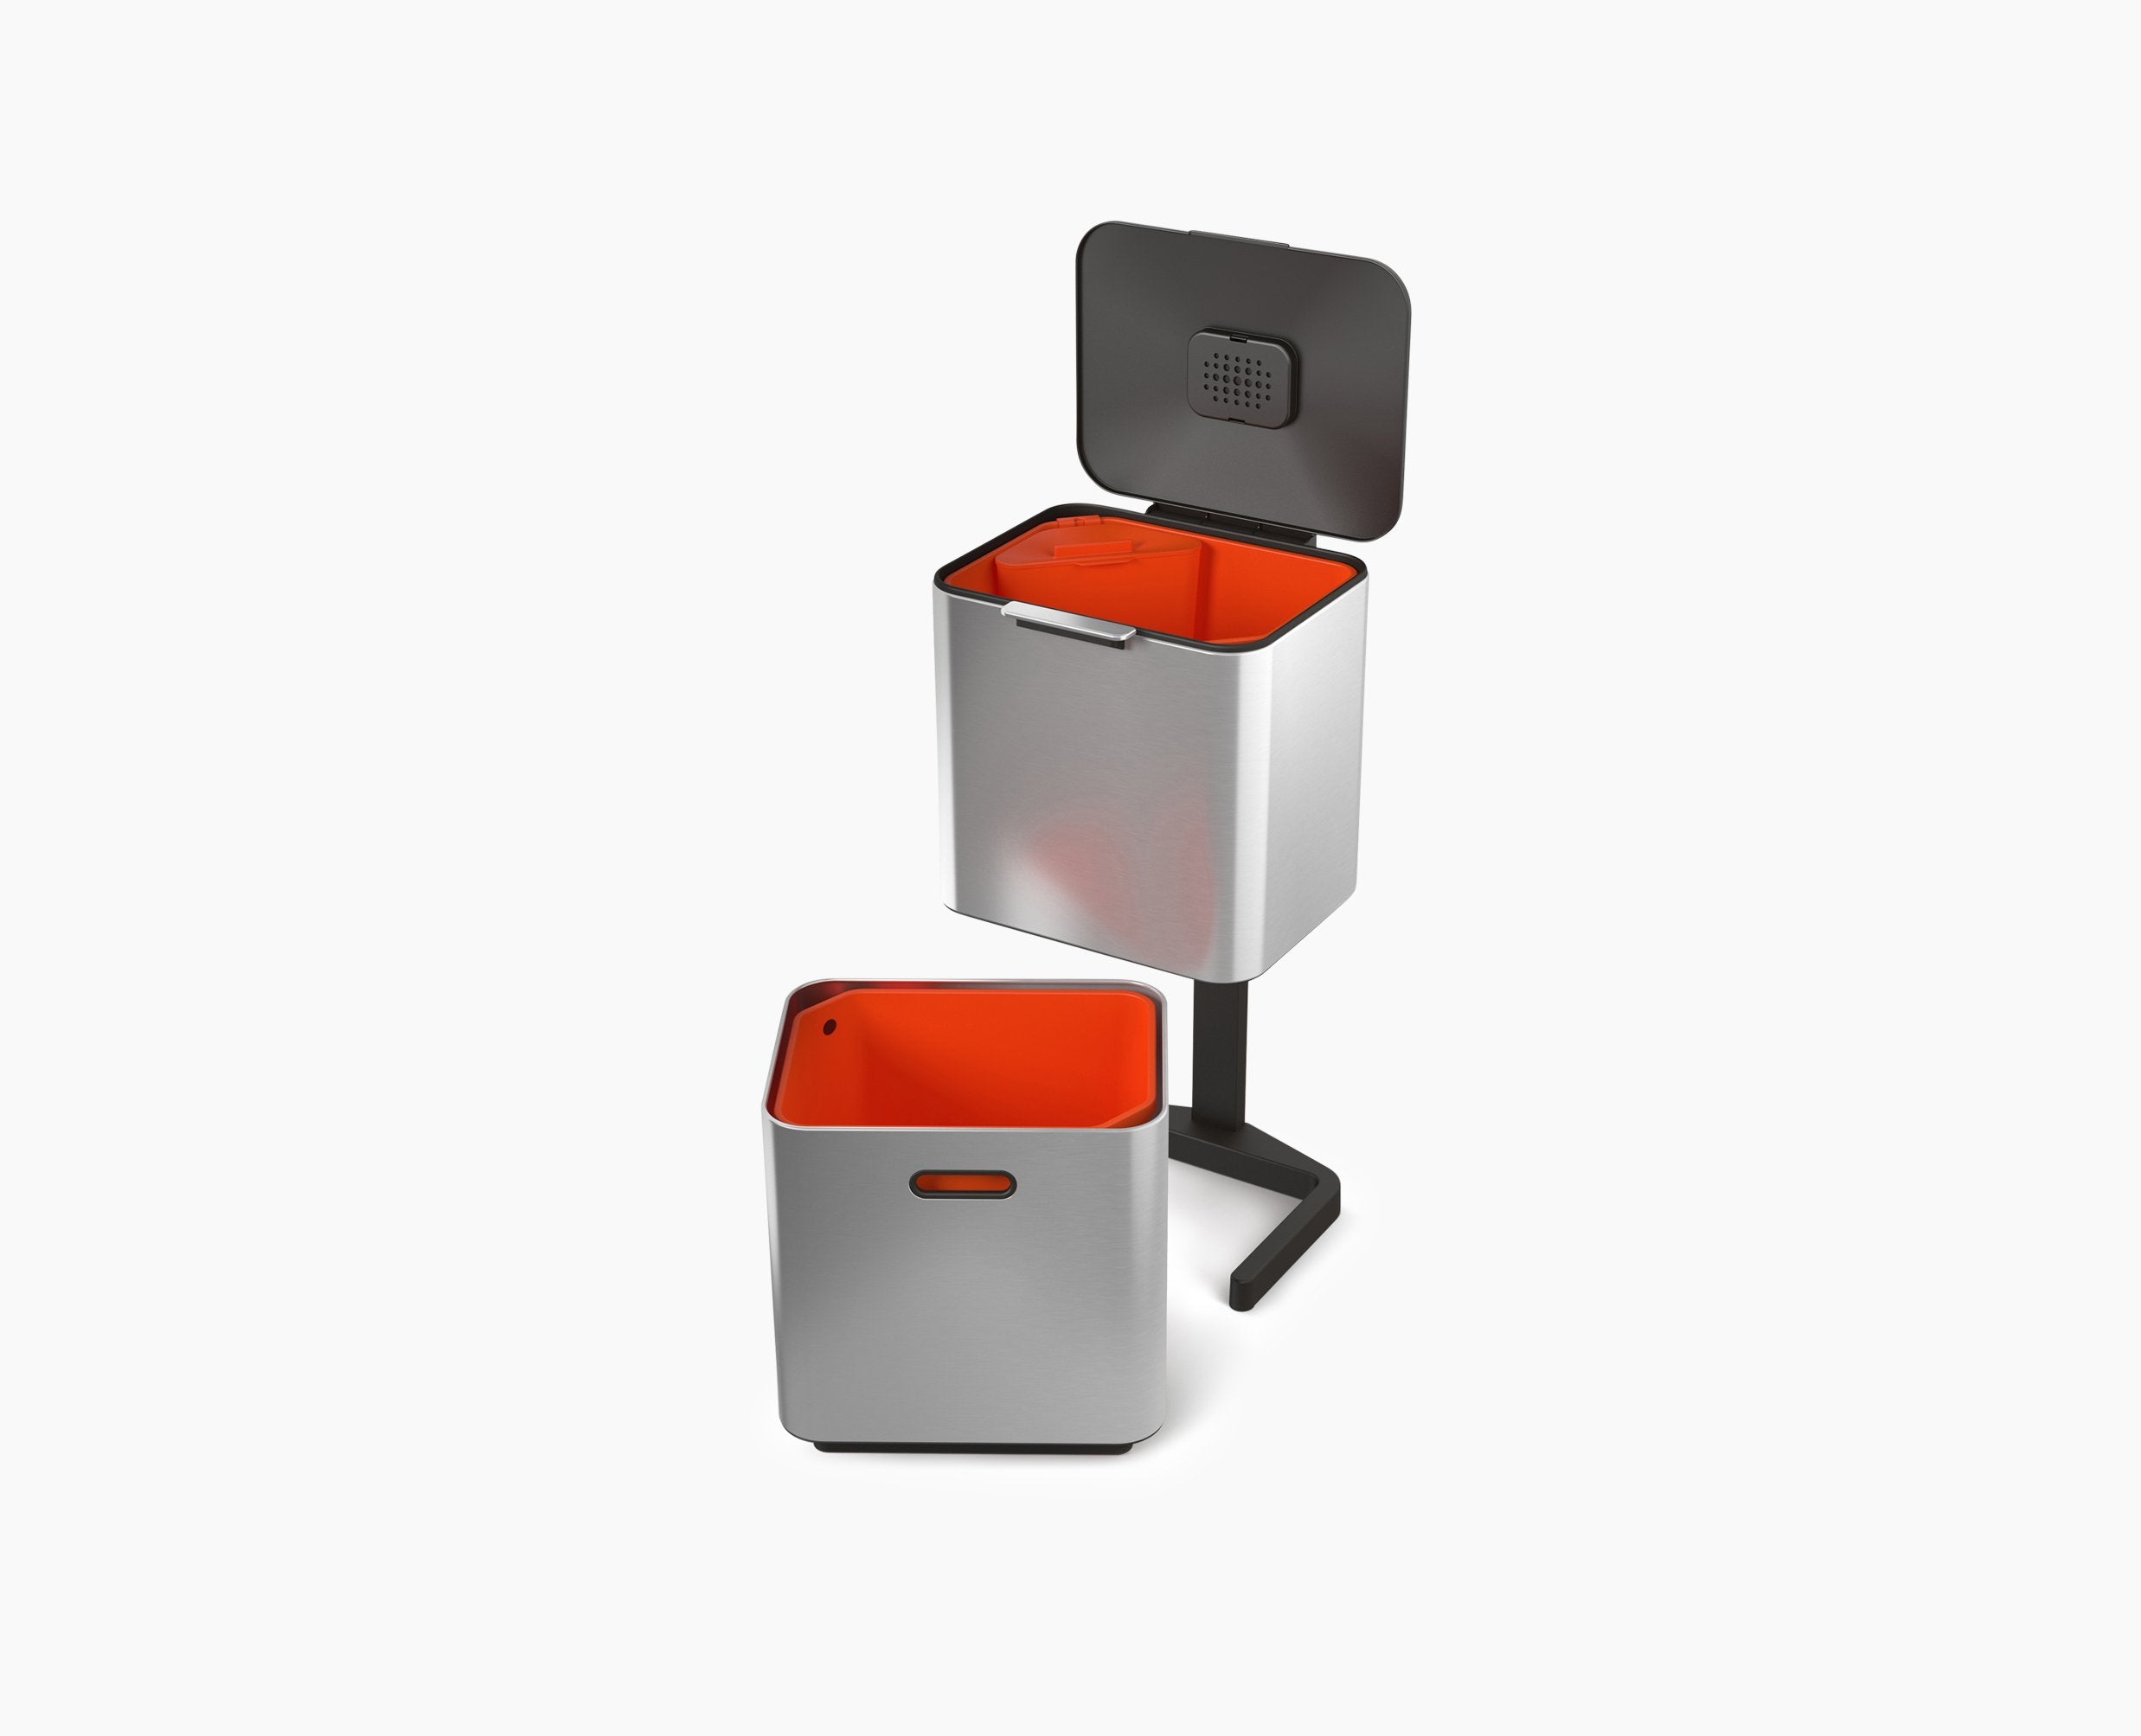 BEON.COM.AU  This award-winning bin has different compartments for your food waste, general waste and recycling so you can easily separate it out with just one compact unit.  60L bin includes 2 x 30-litre compartments and a 3-litre removable food waste caddy with lid  Unique vertical design maximises capacit... Joseph Joseph at BEON.COM.AU